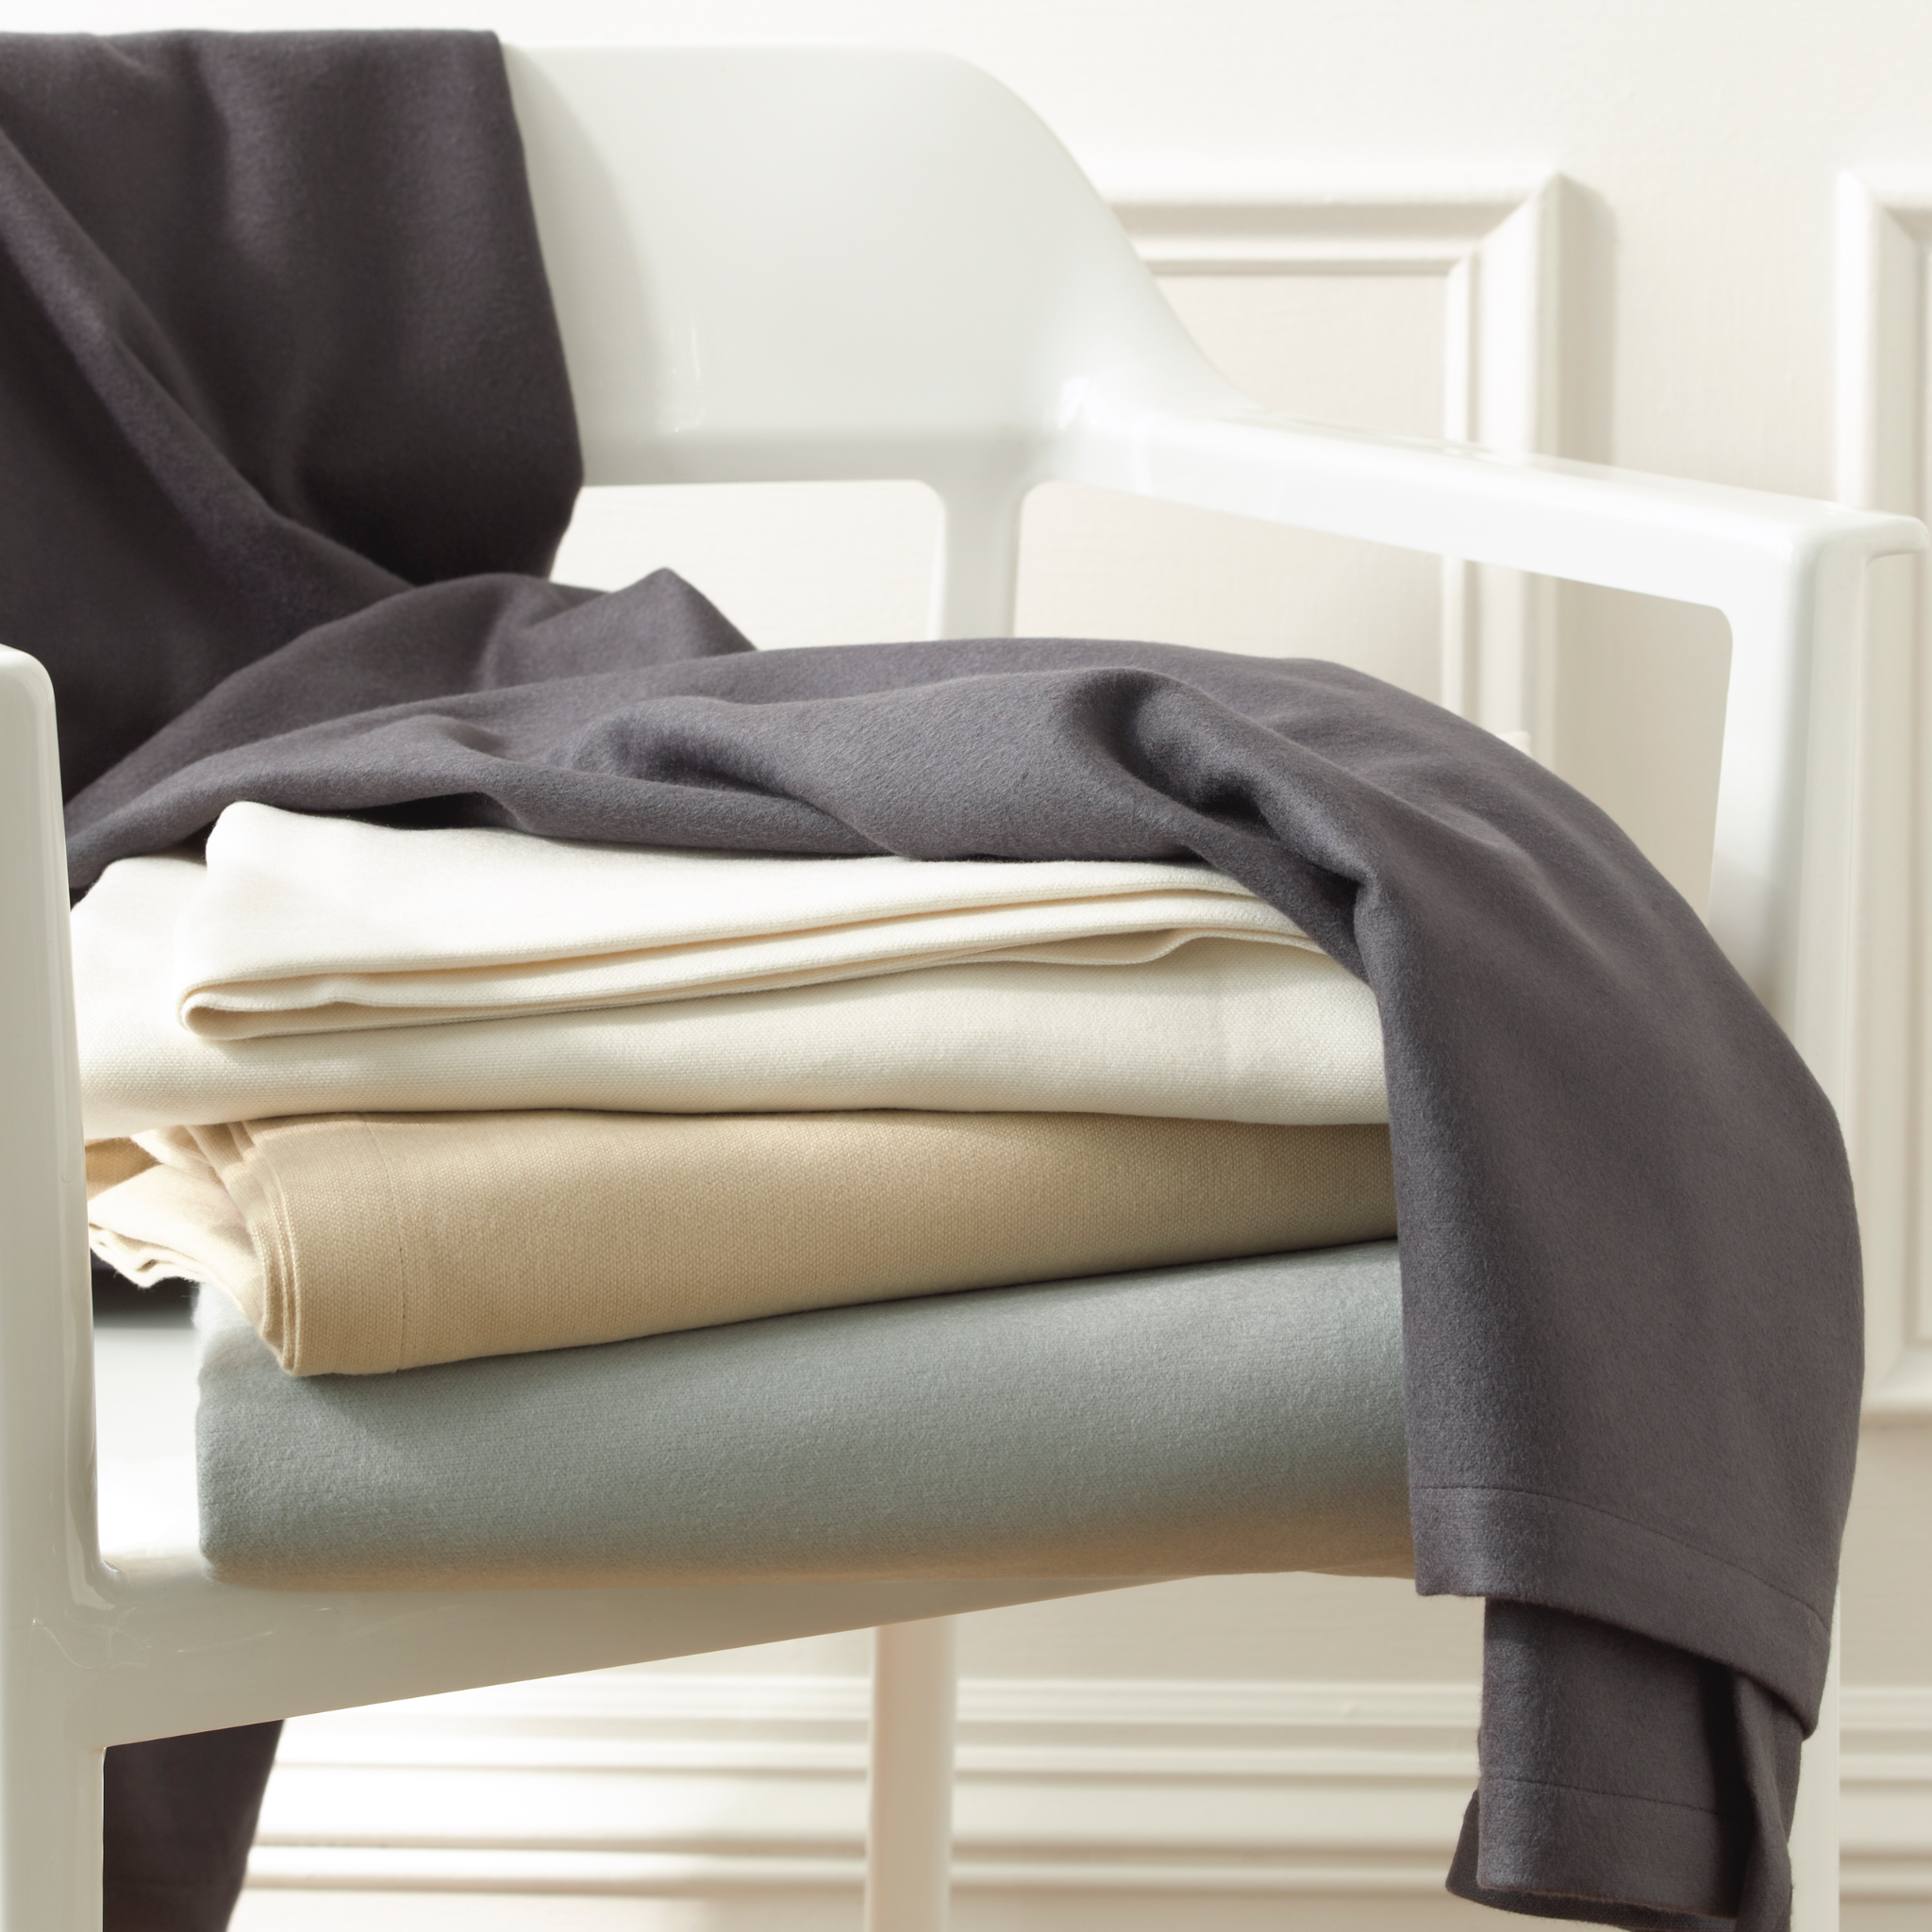 Matouk Dream Modal Blankets and Throws